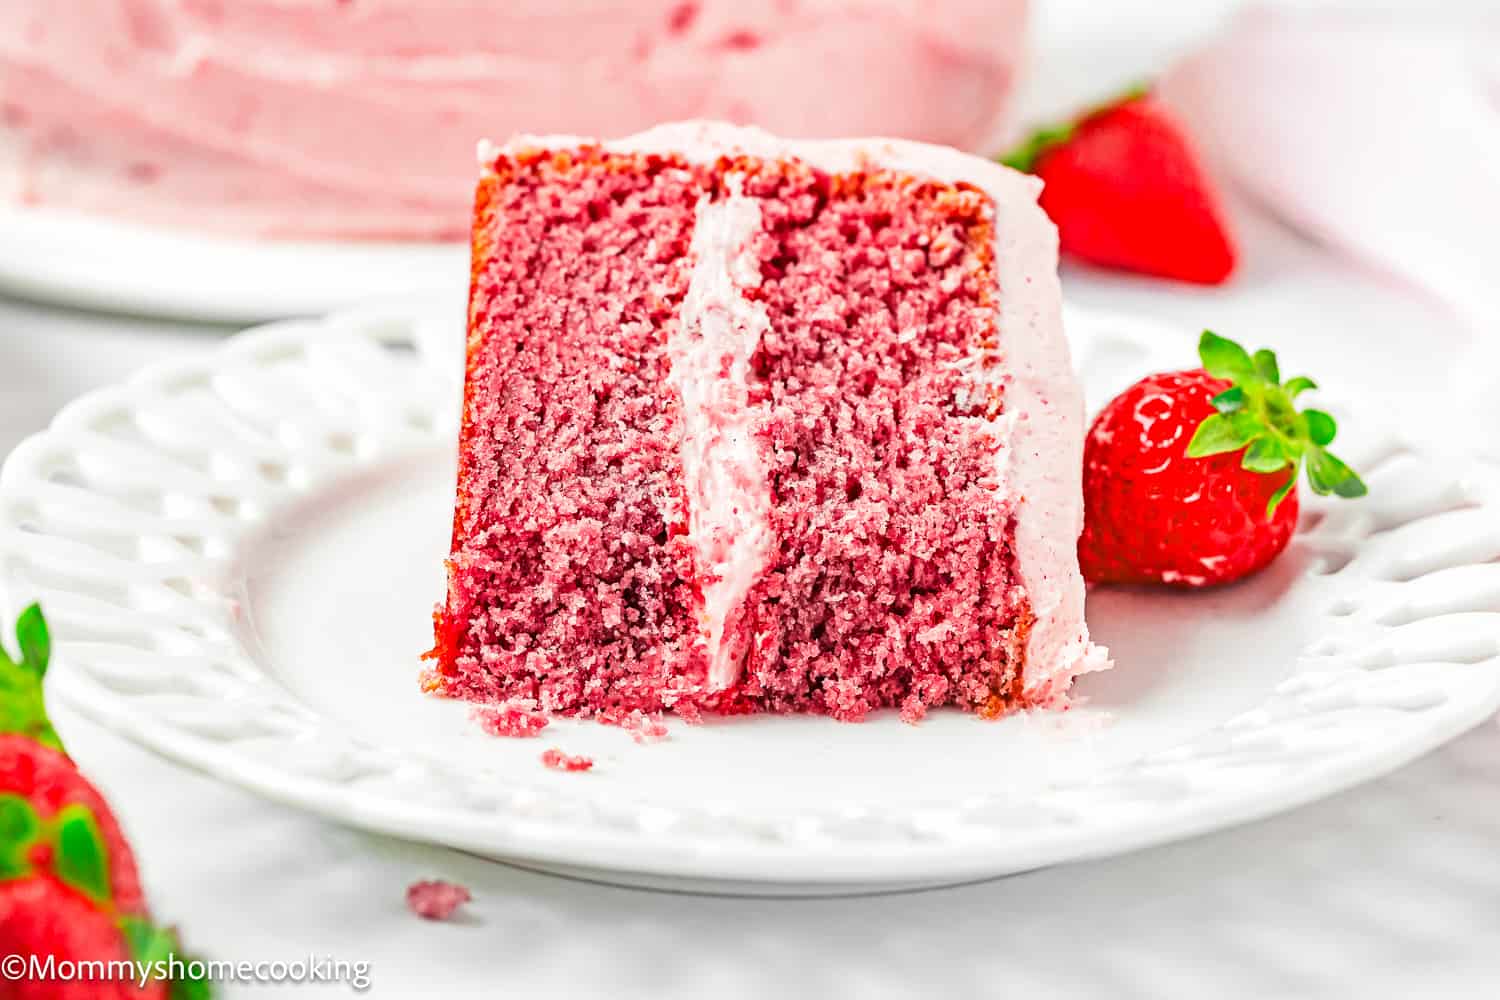 a bitten slice of Easy Fresh Strawberry Cake showing its fluffy inside texture on a plate.